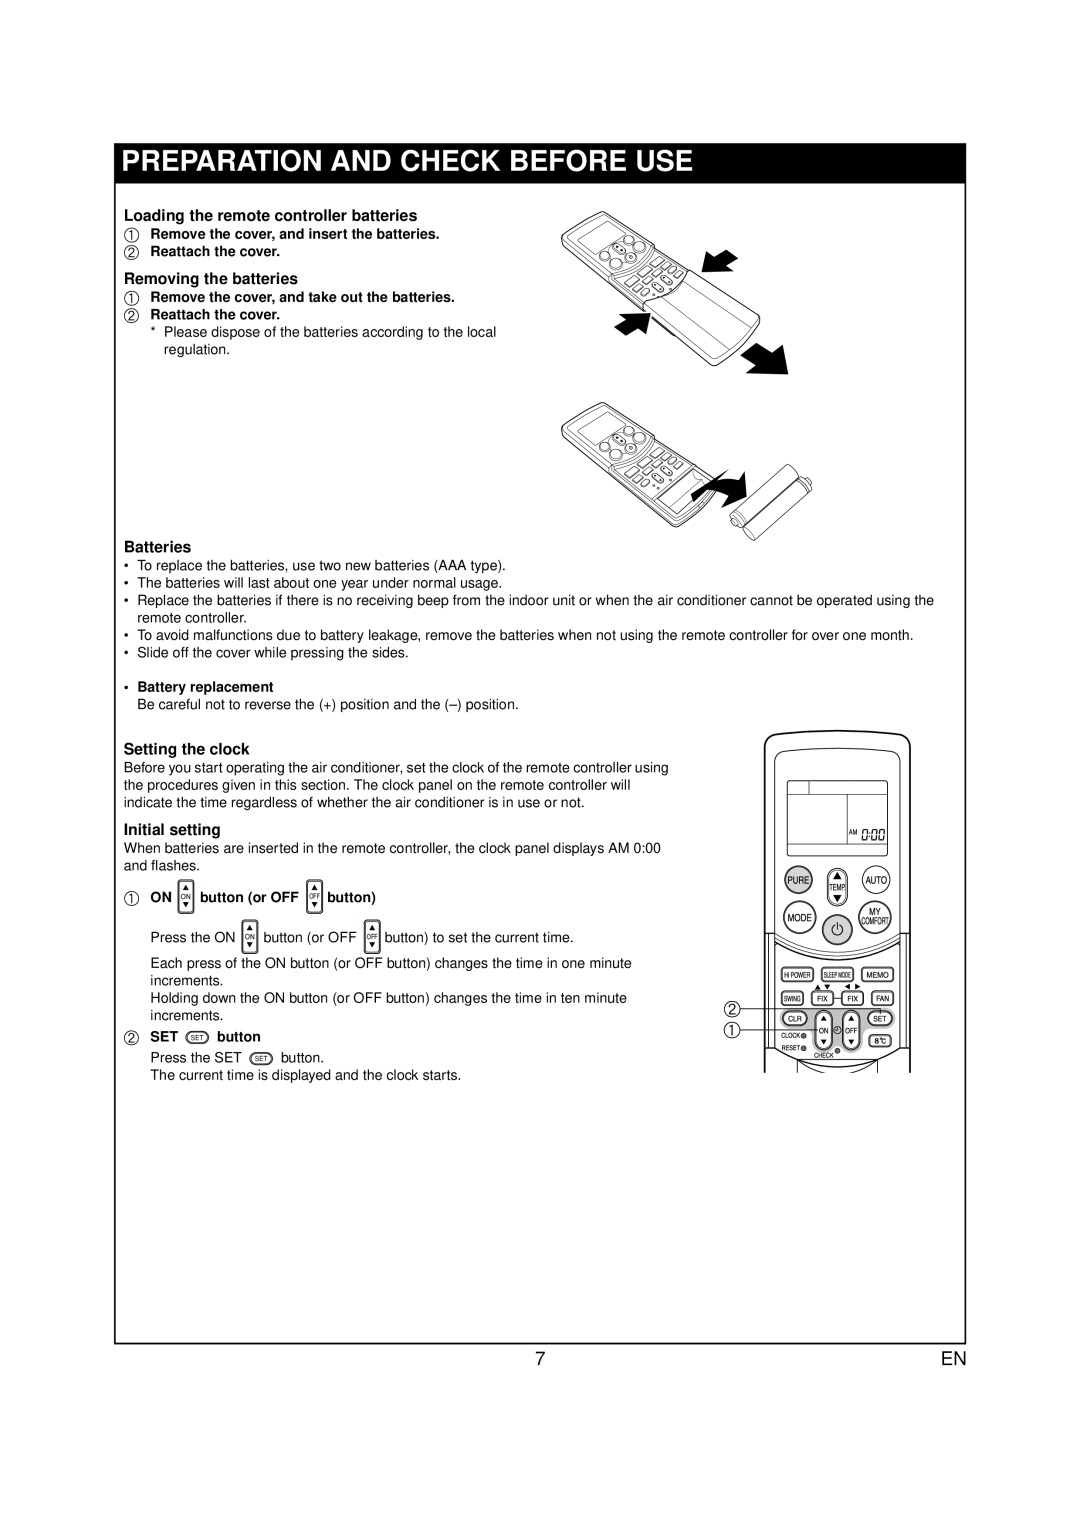 Toshiba RAS-07PKVP-E Preparation And Check Before Use, Loading the remote controller batteries, Removing the batteries 